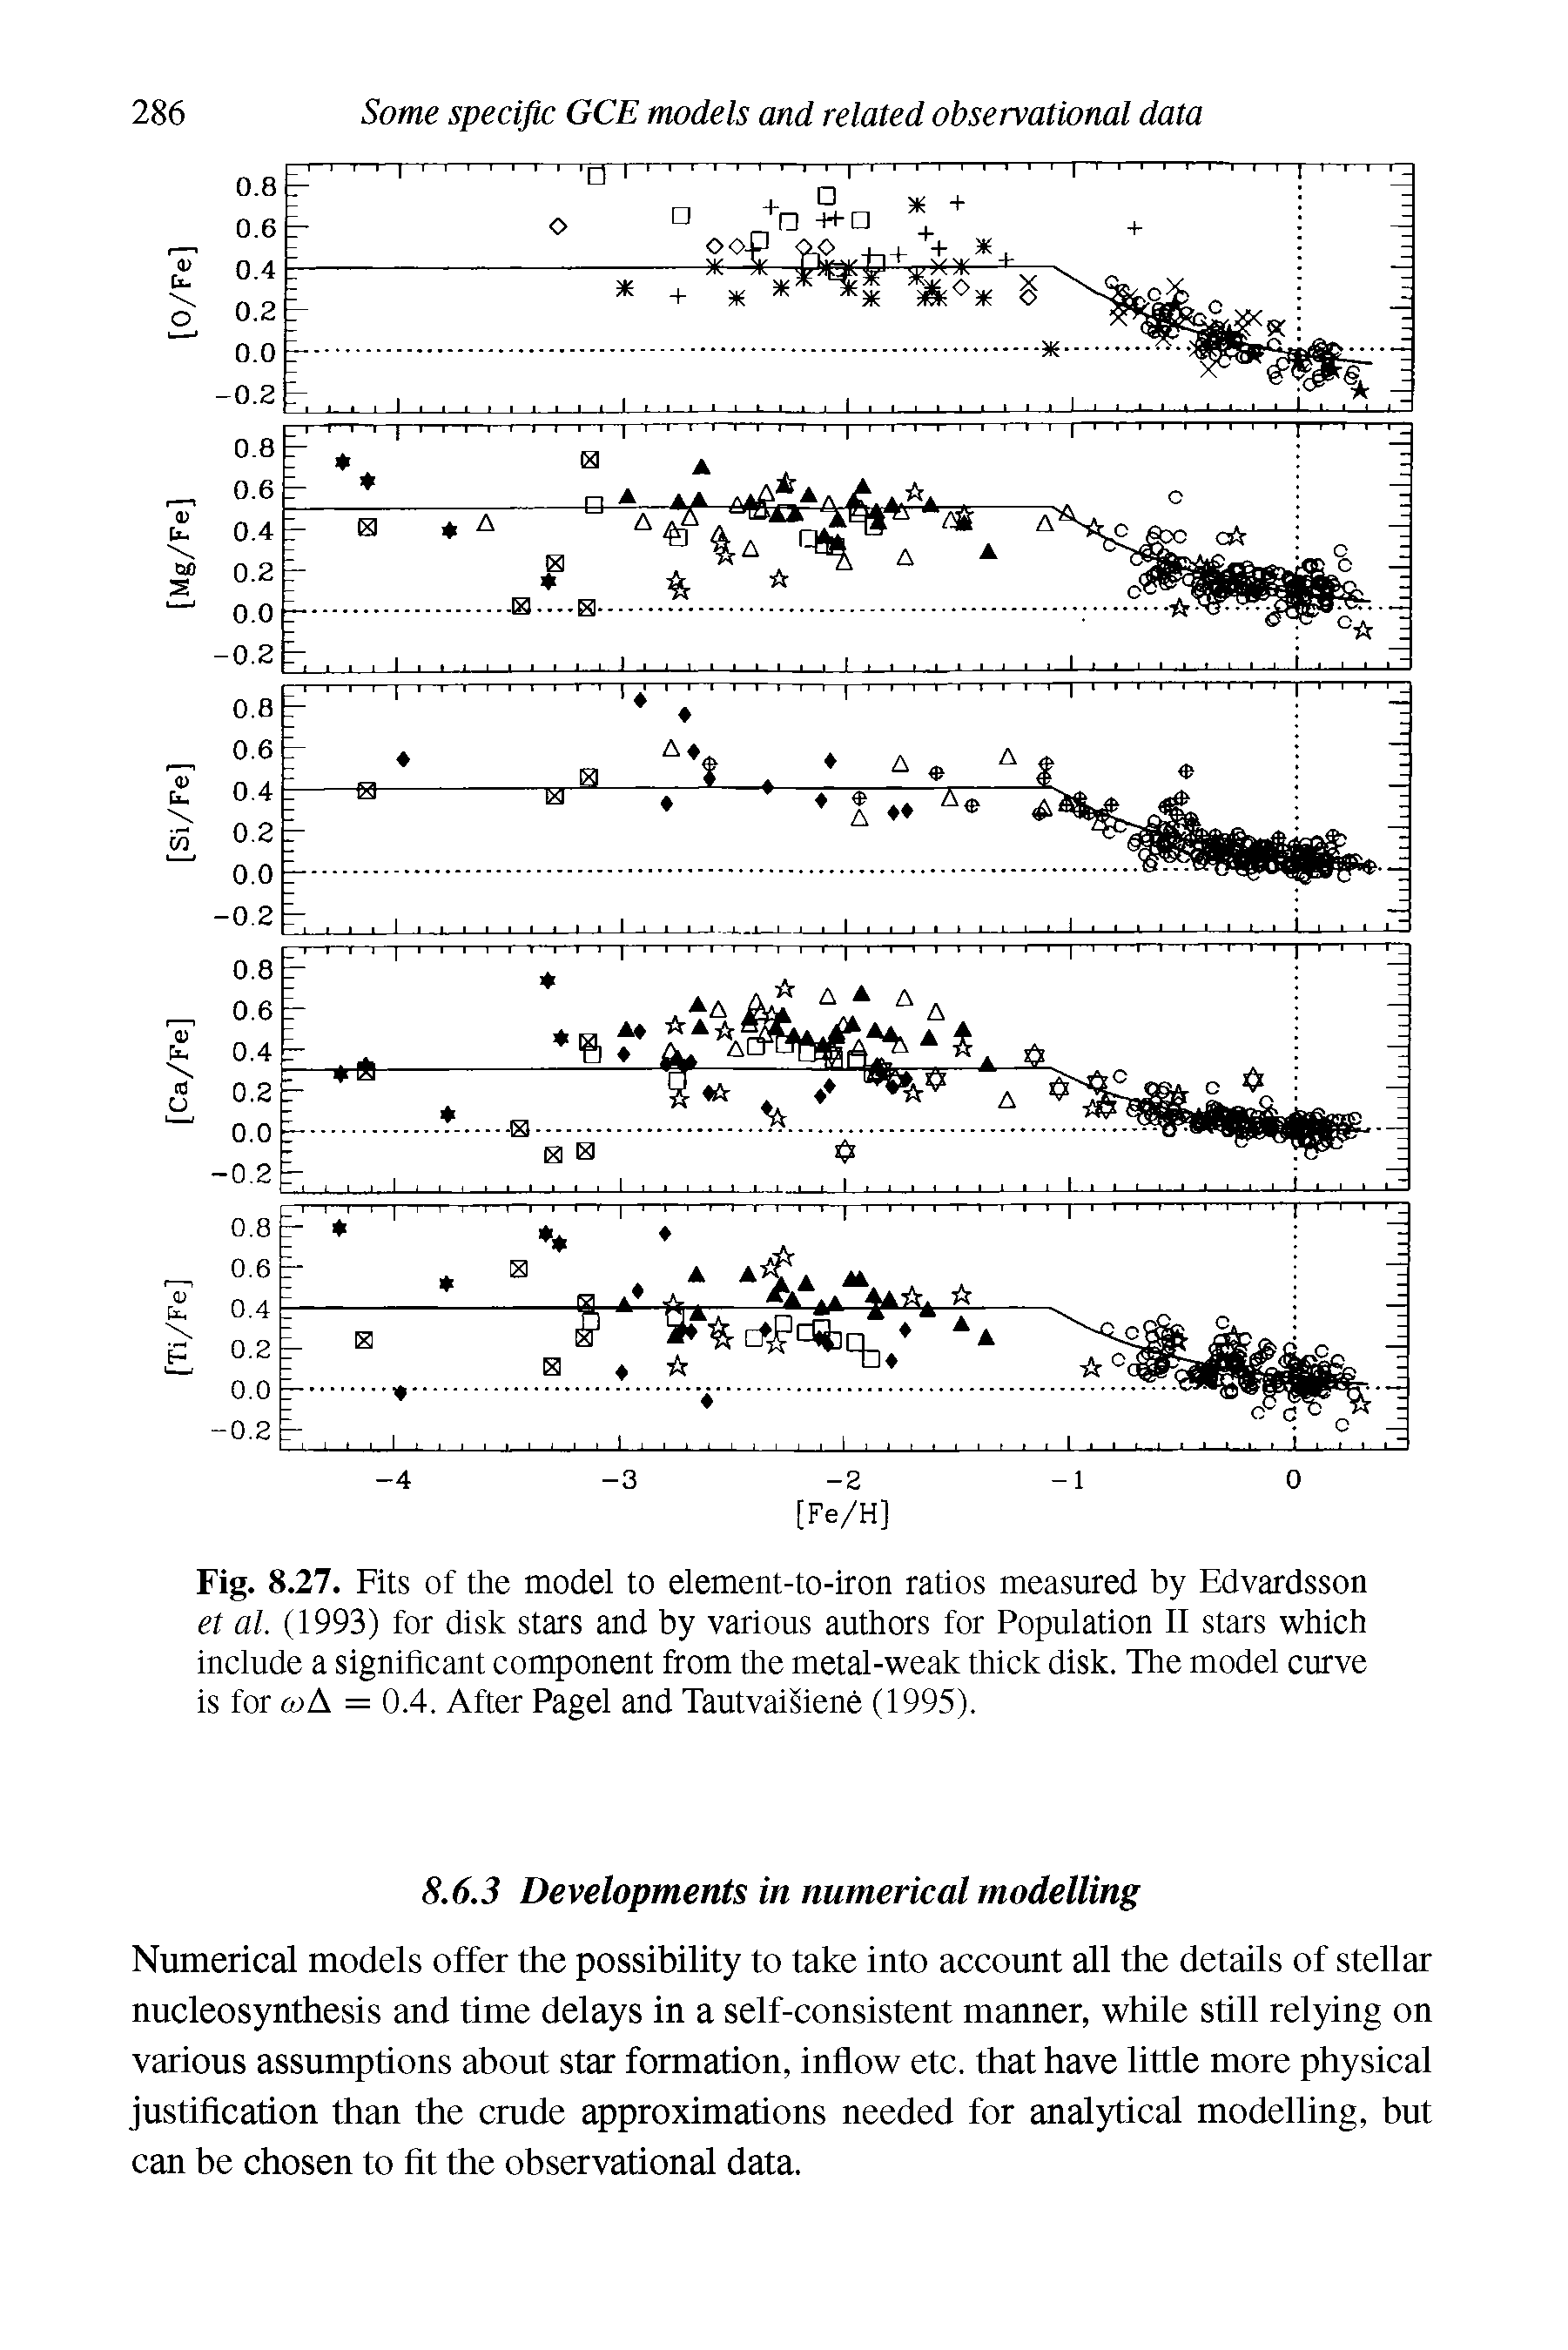 Fig. 8.27. Fits of the model to element-to-iron ratios measured by Edvardsson et al. (1993) for disk stars and by various authors for Population II stars which include a significant component from the metal-weak thick disk. The model curve is for coA = 0.4. After Pagel and Tautvaisiene (1995).